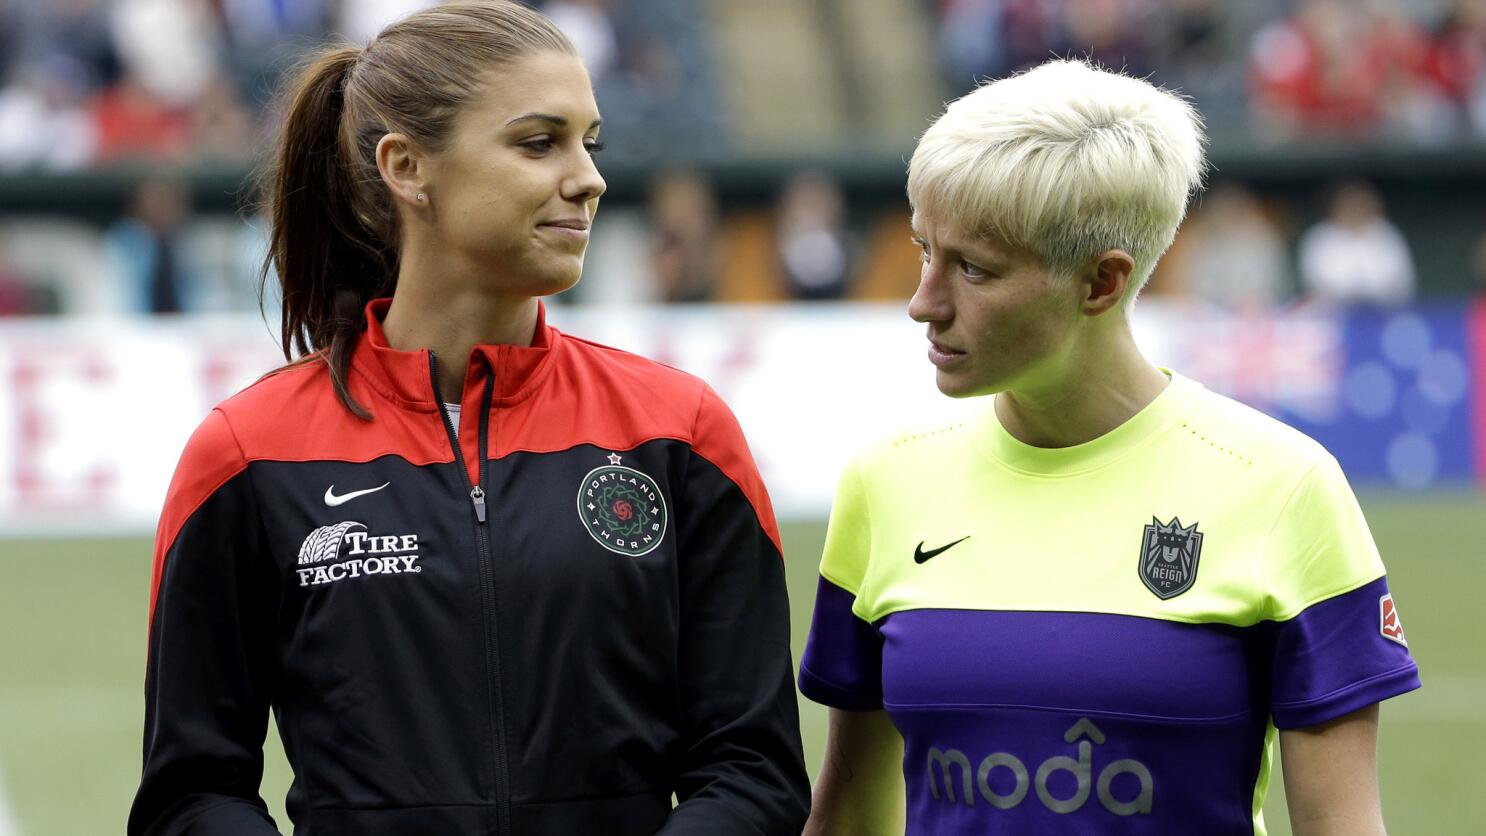 NWSL Owners Step Aside as USWNT Stars Call for Change - The New York Times